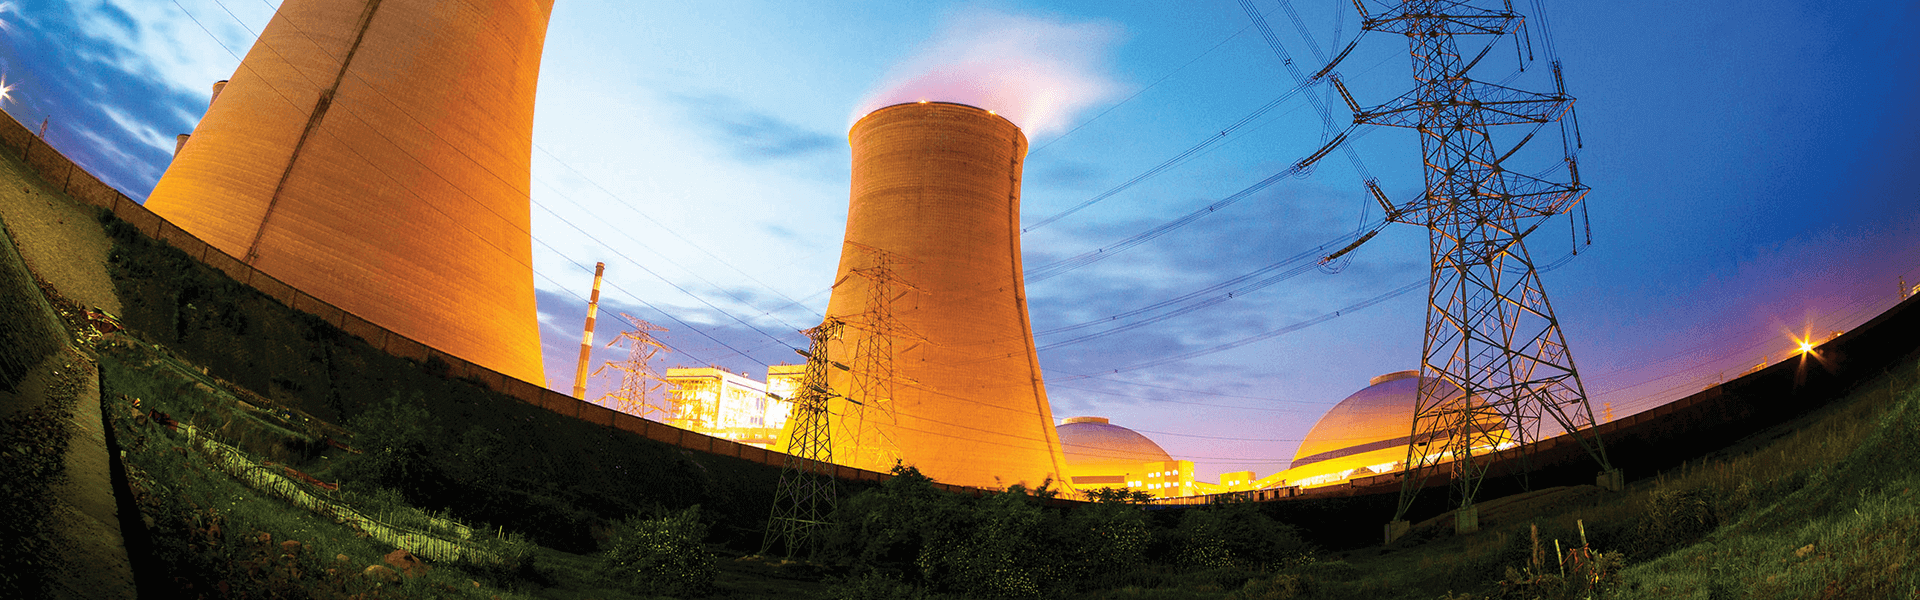 Thermal power plant at night